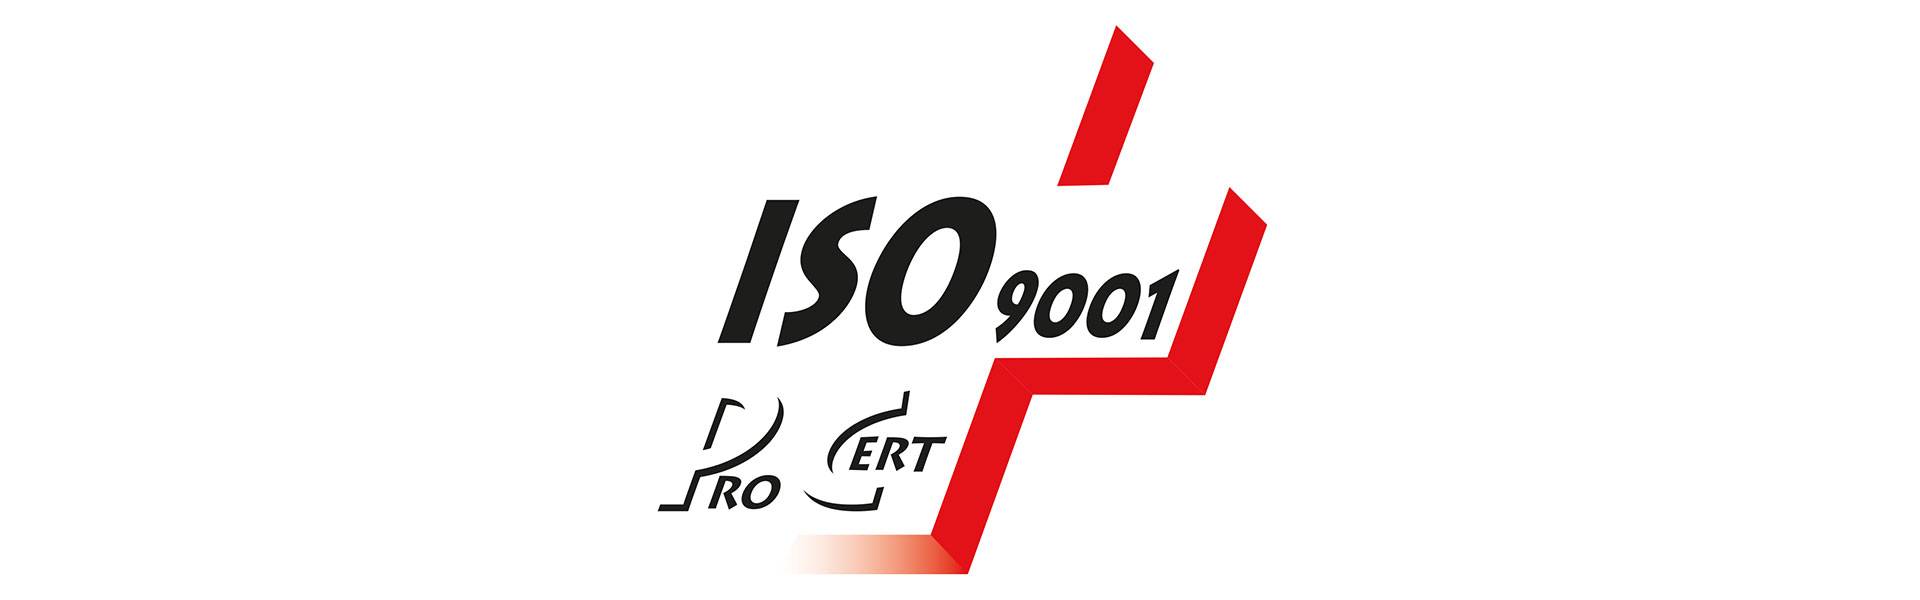 Certification ISO 9001 Pro